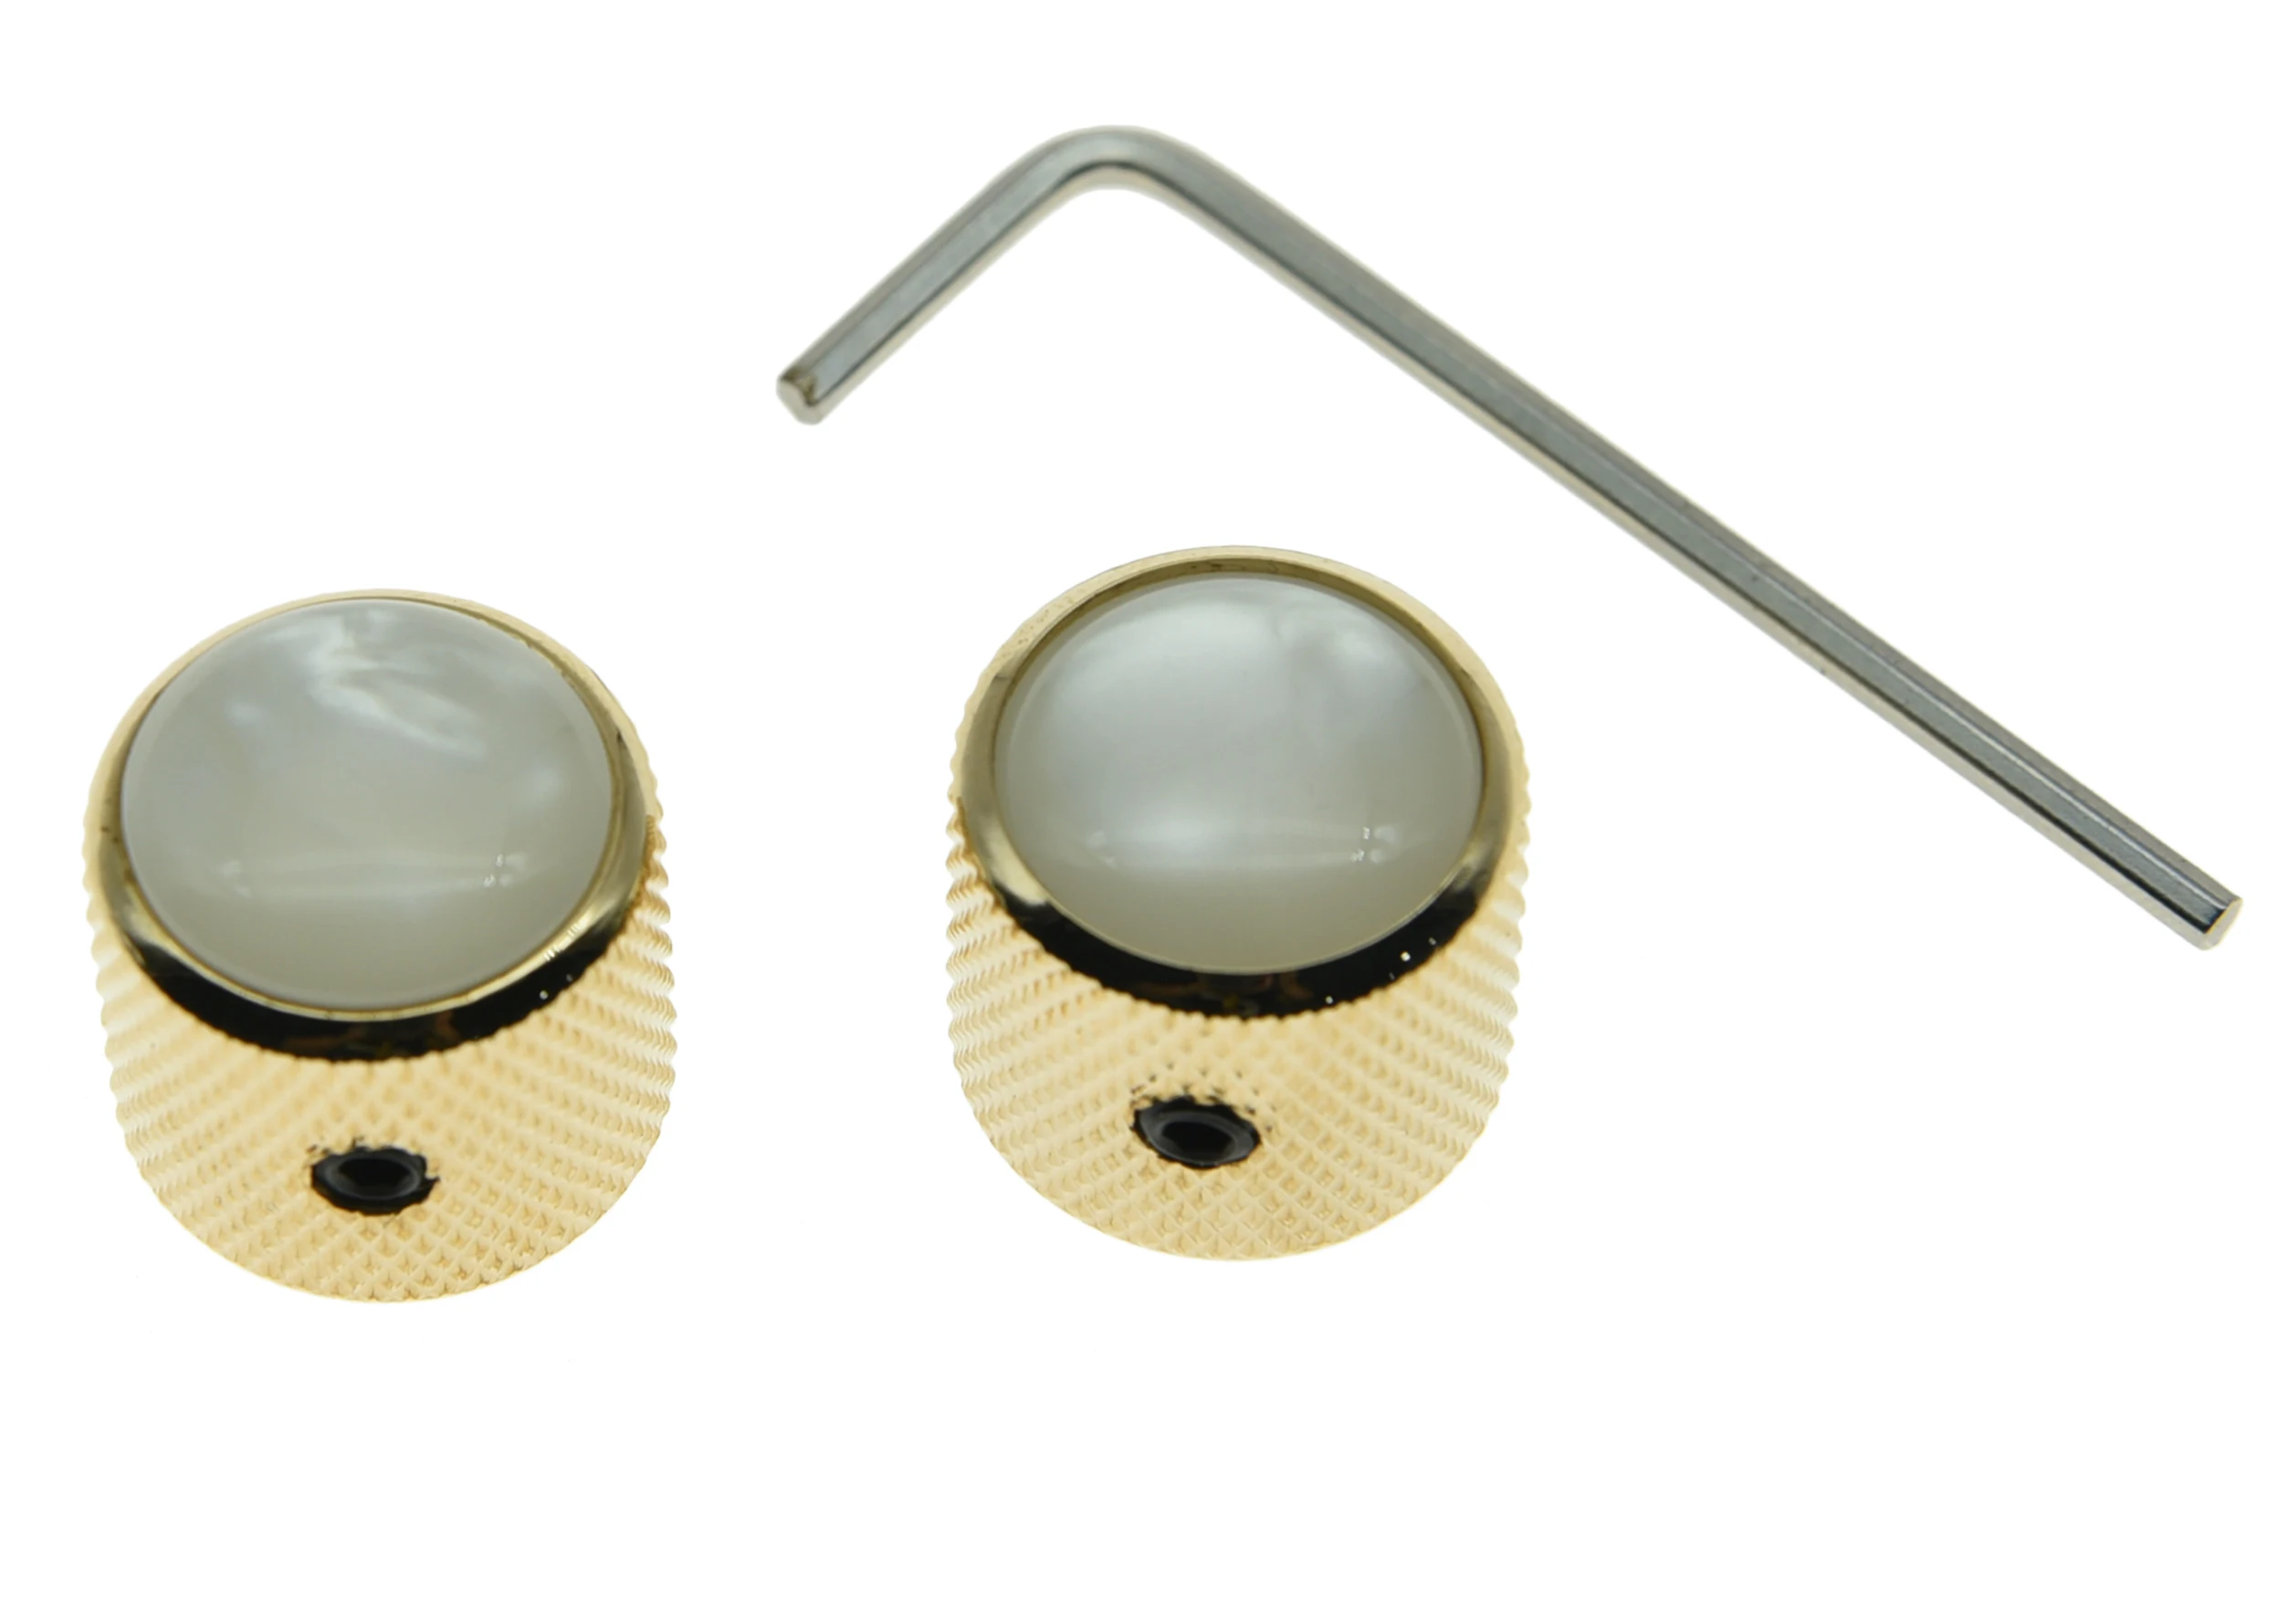 KAISH Set of 2 Gold White Pearl Top Guitar Dome Knobs with Set Screw for Tele Guitars White Pearl Cap Bass Knobs